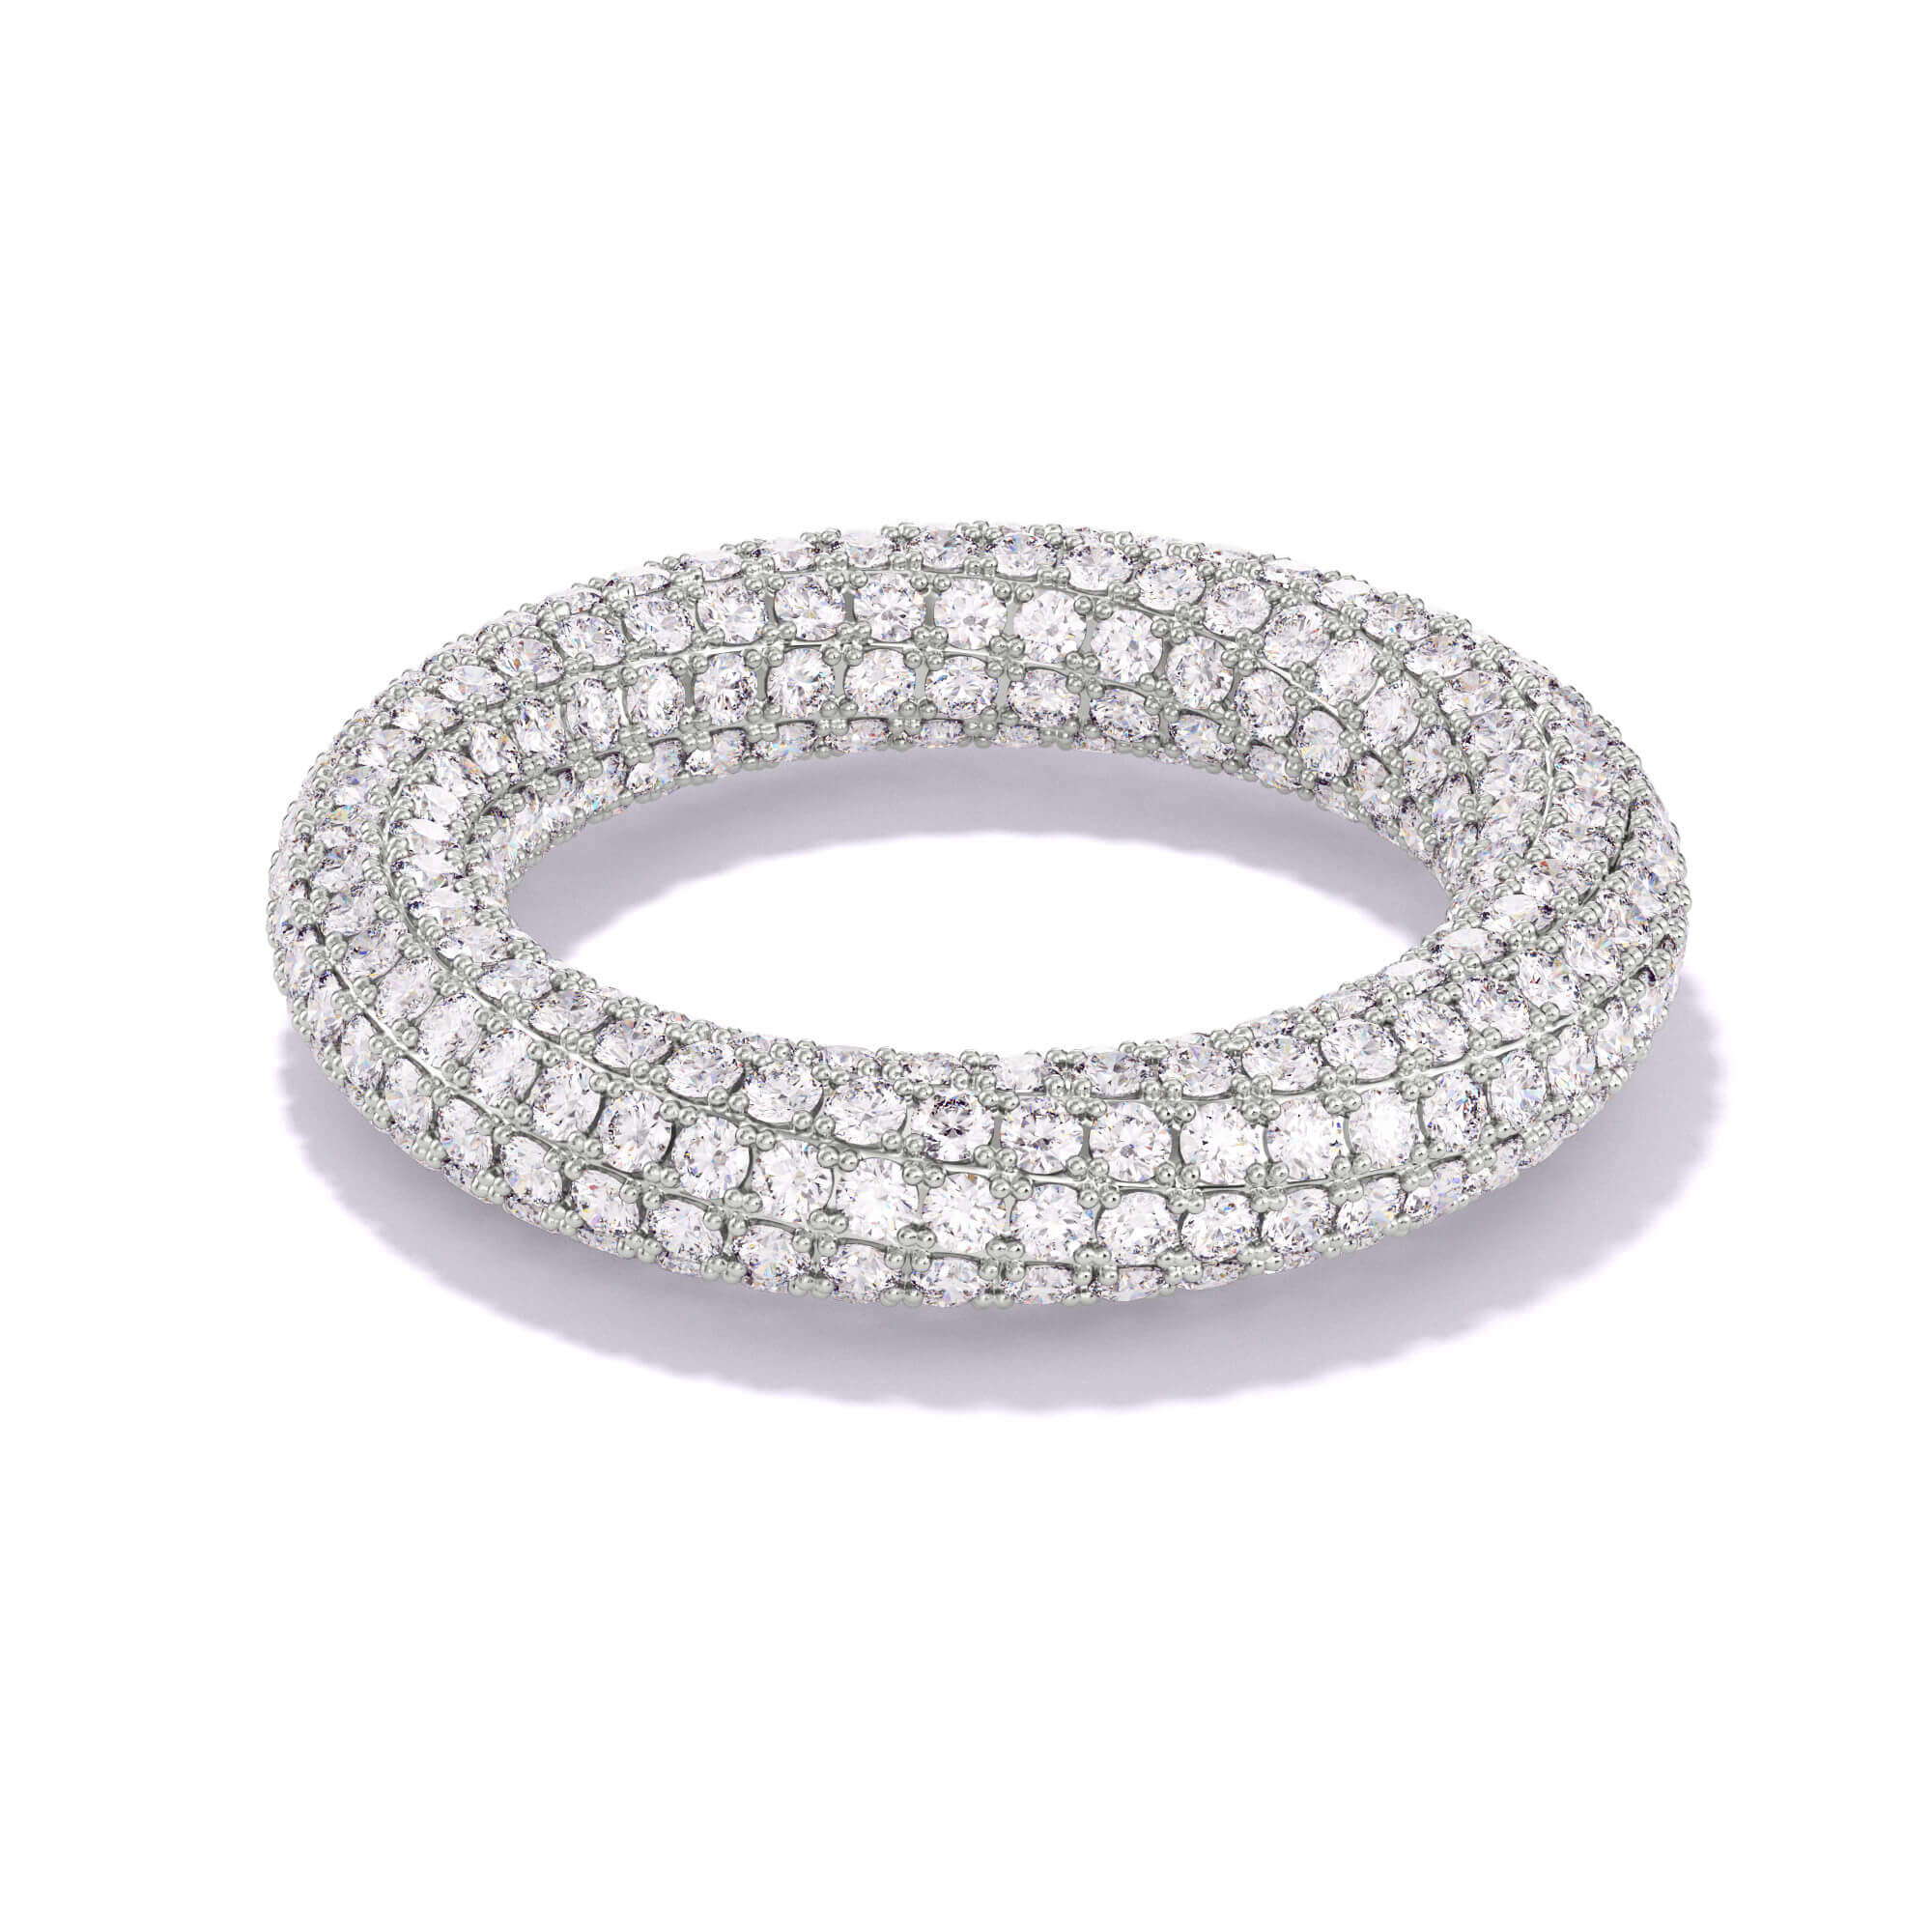 Continuum two row pave eternity band